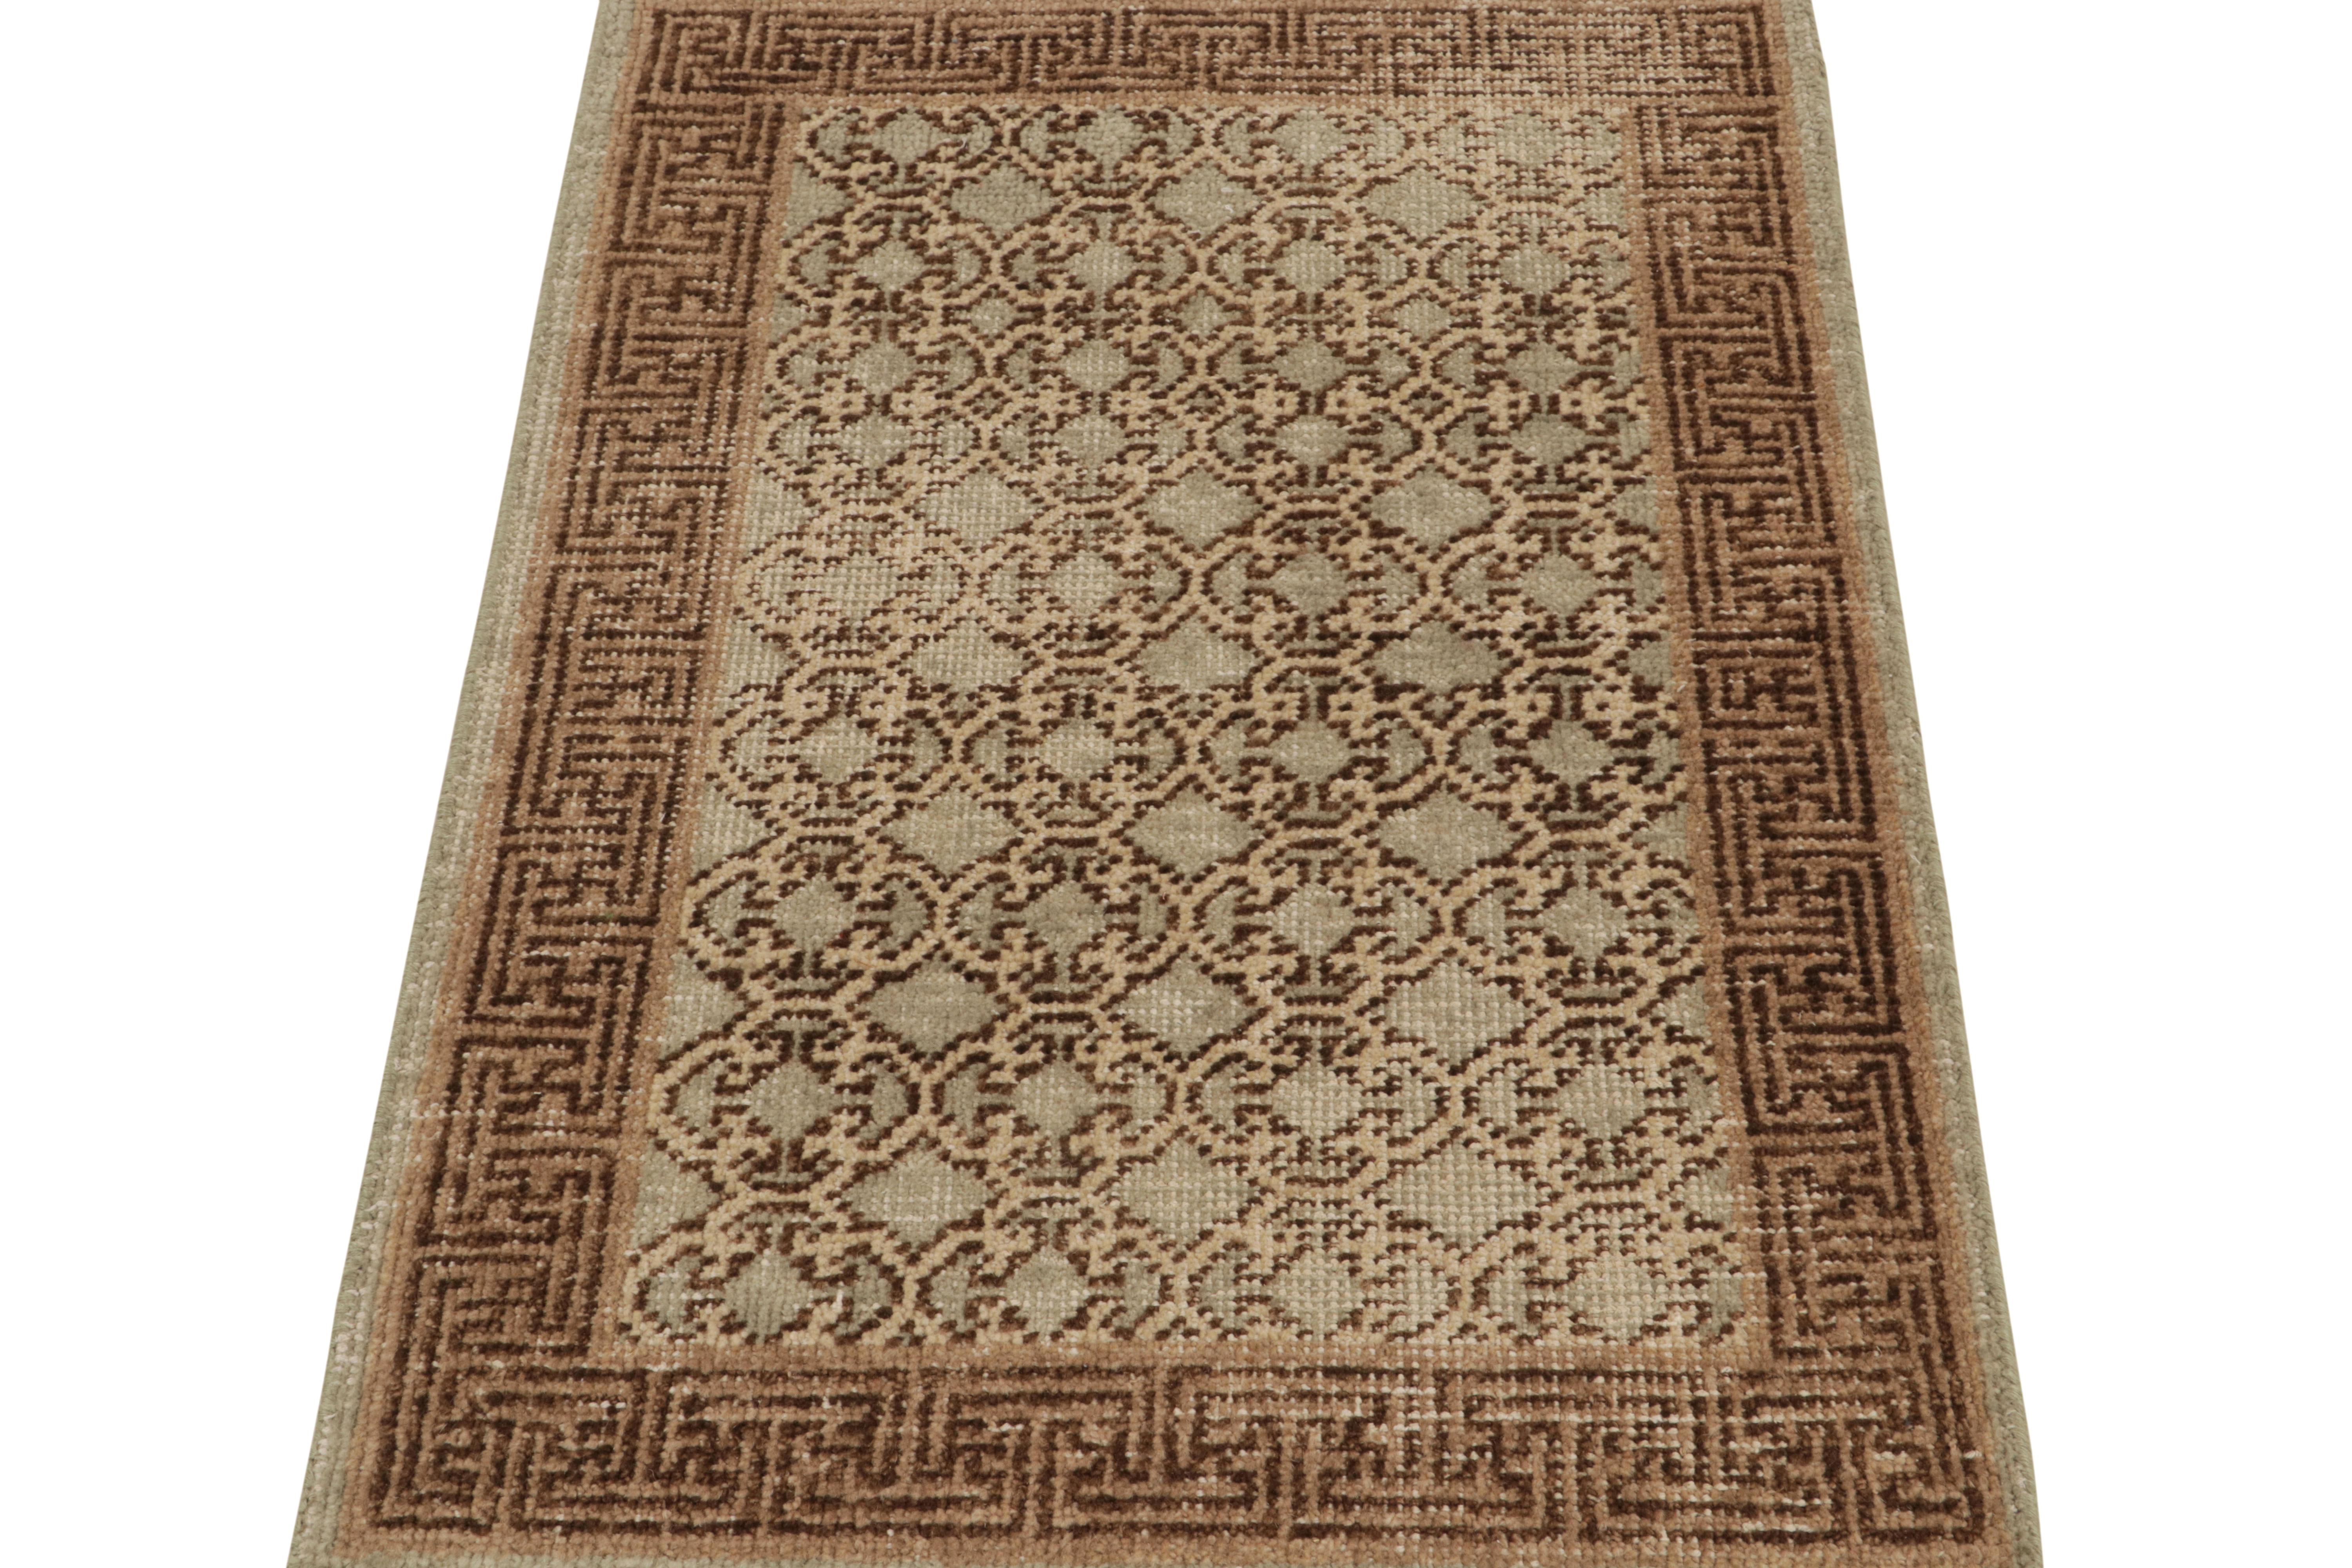 An elegant 2x3 hand-knotted wool rug from Rug & Kilim’s Homage Collection—a bold textural encyclopedia of venerated patterns and styles. 

On the design: 

The classic frame stands inspired by antique Khotan Samarkand rugs of the early 20th century,